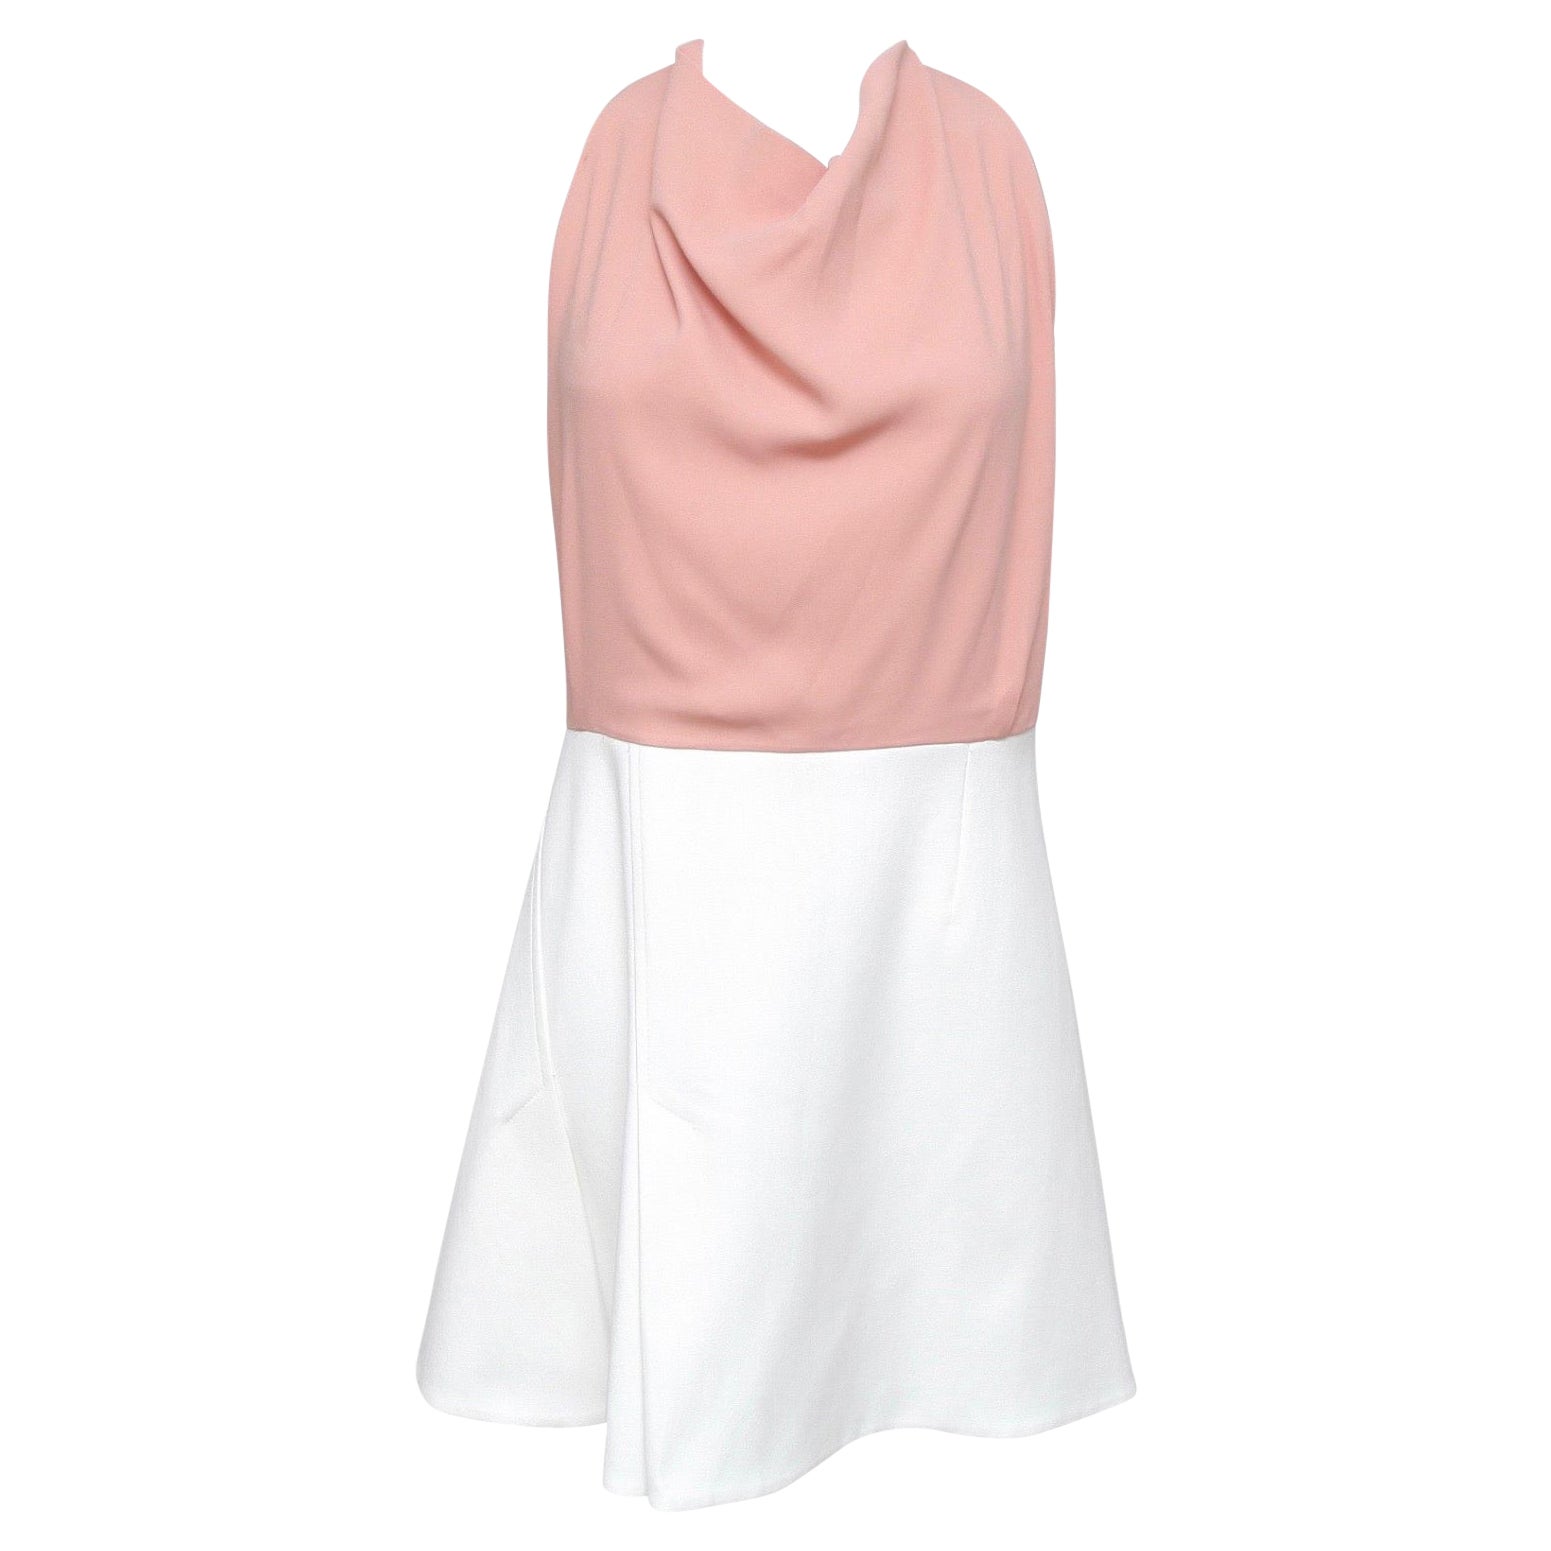 ROLAND MOURET Sleeveless Dress Cowl Neck 2016 PAGET White Pink 14 BNWT $1230 For Sale